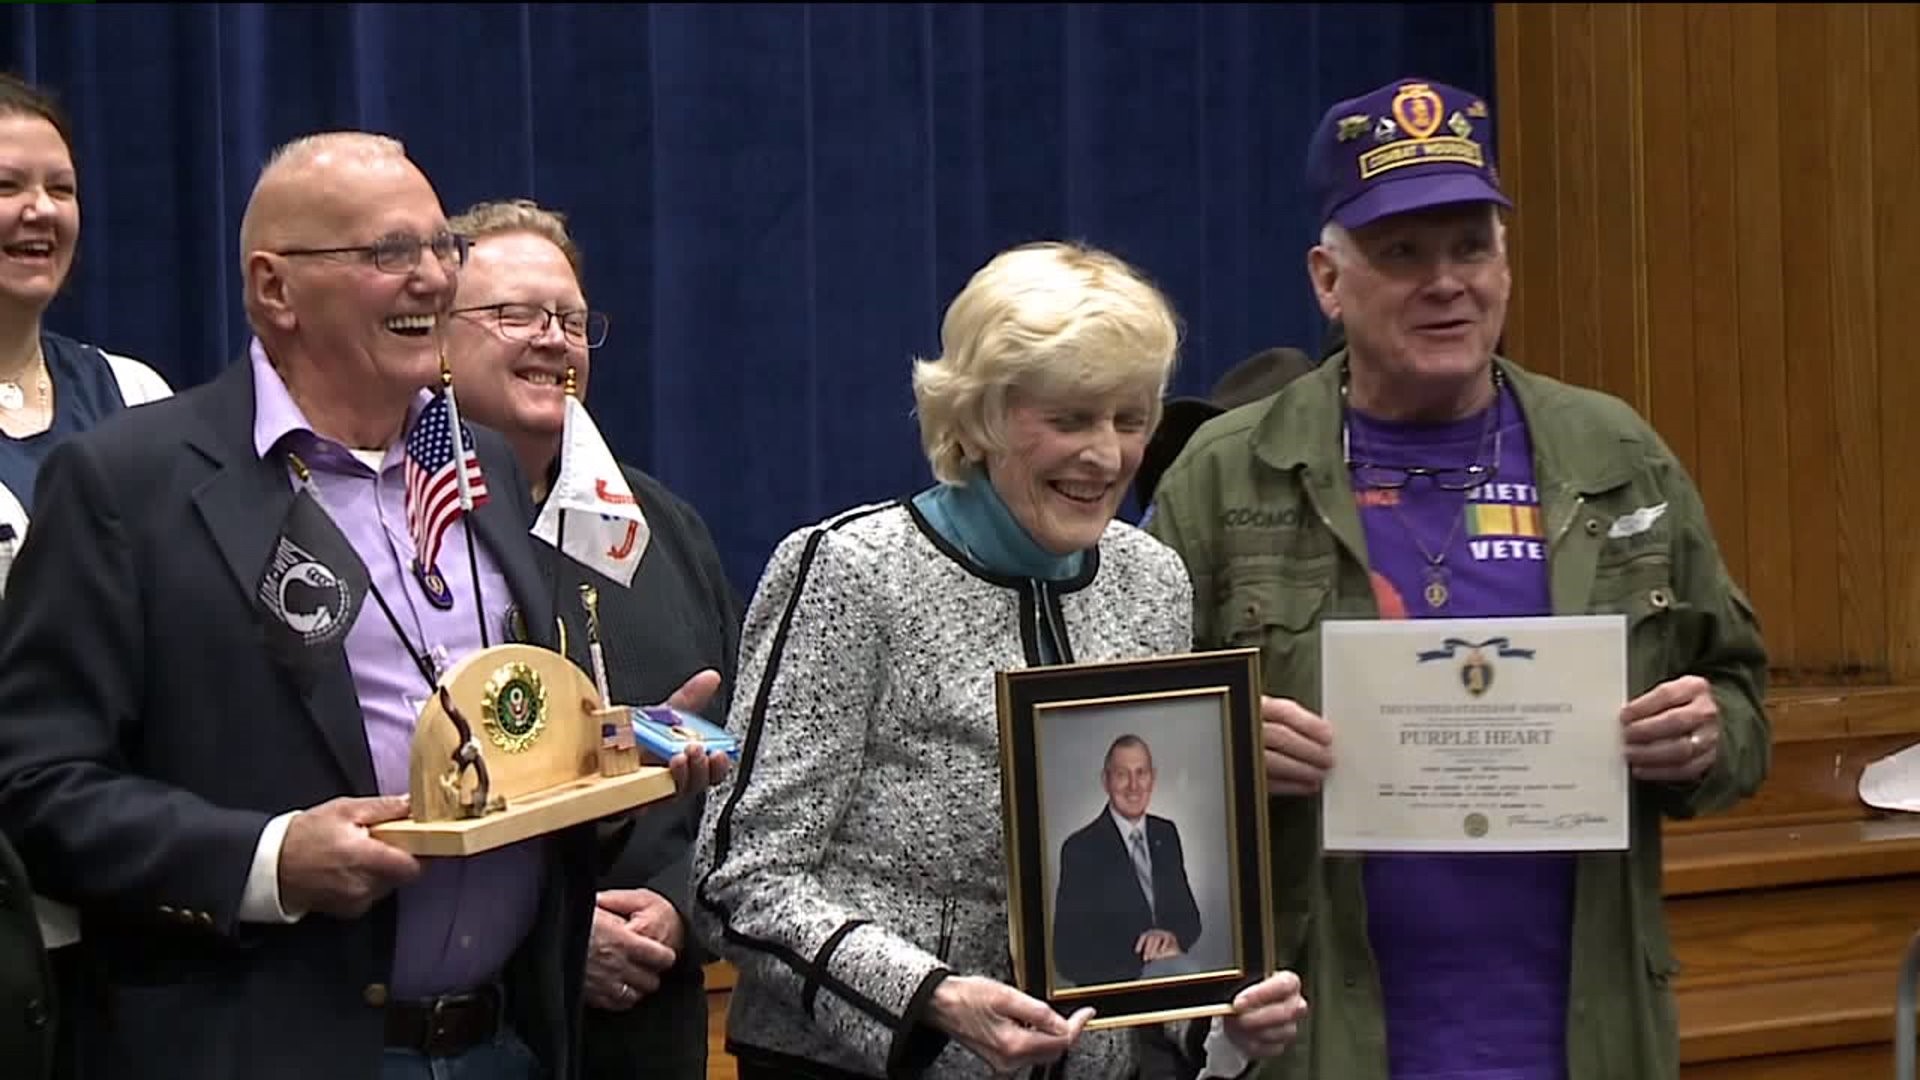 Veterans Recognized at Ceremony in Columbia County